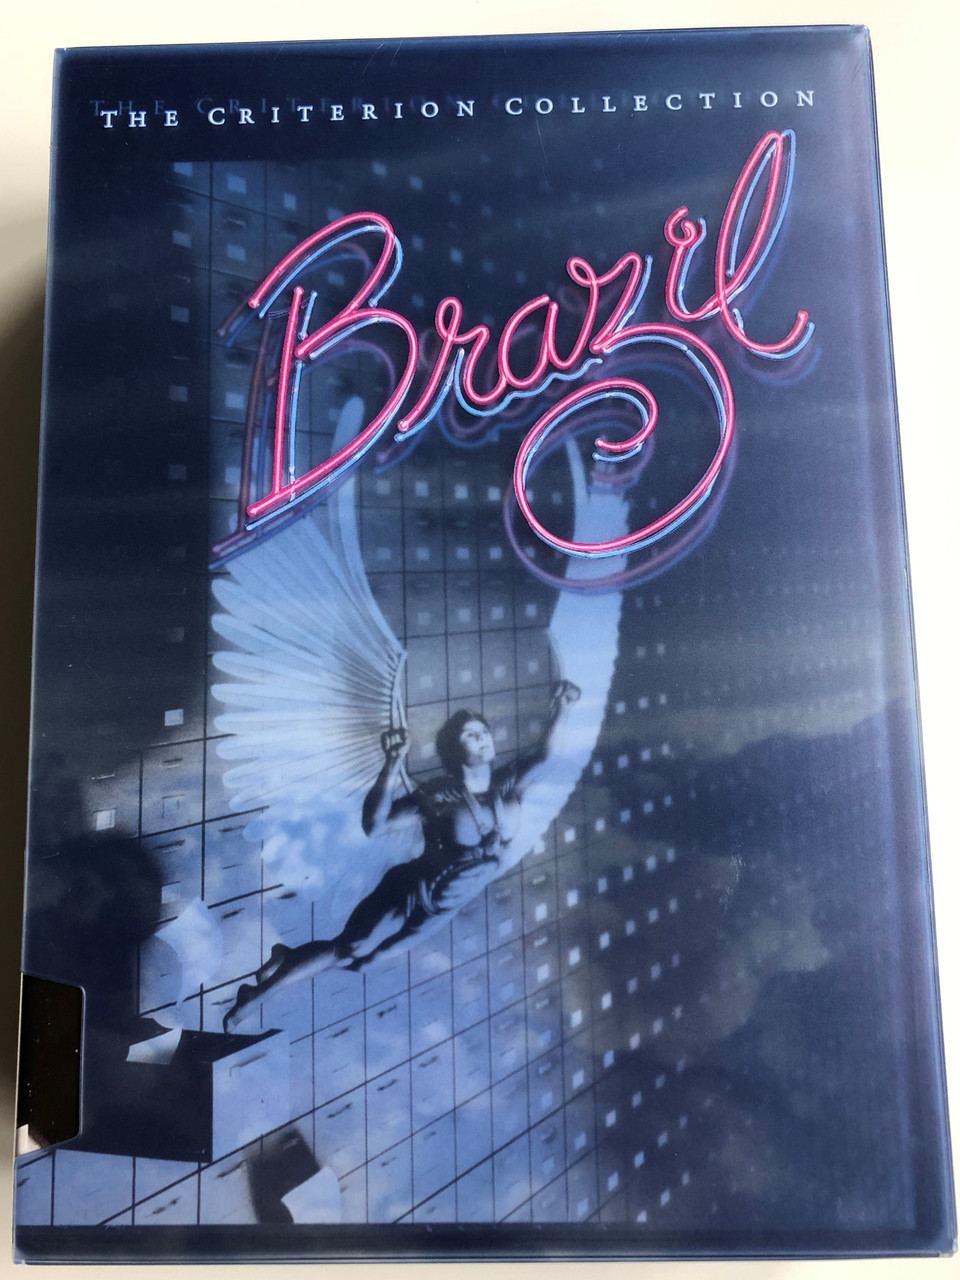 Brazil (1985 ) The Criterion Collection DVD SET - 3 discs / Directed by  Terry Gilliam / Starring: Jonathan Pryce, Robert de Niro, Katherine Helmond  / Disc 1 - The Movie, Disc